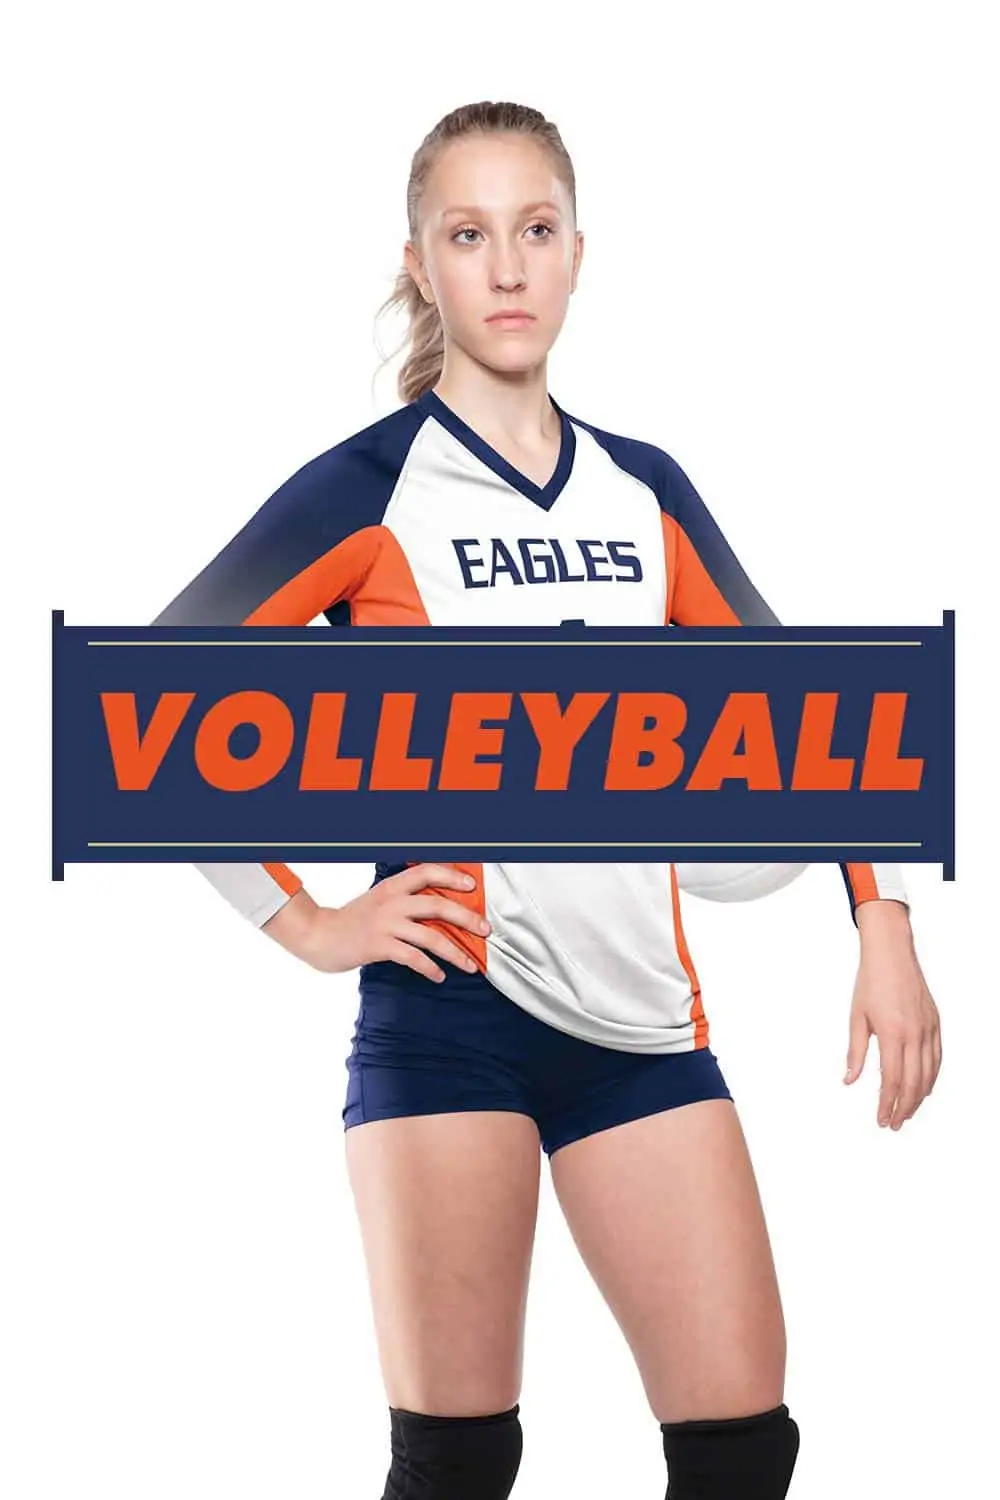 Volleyball  player image